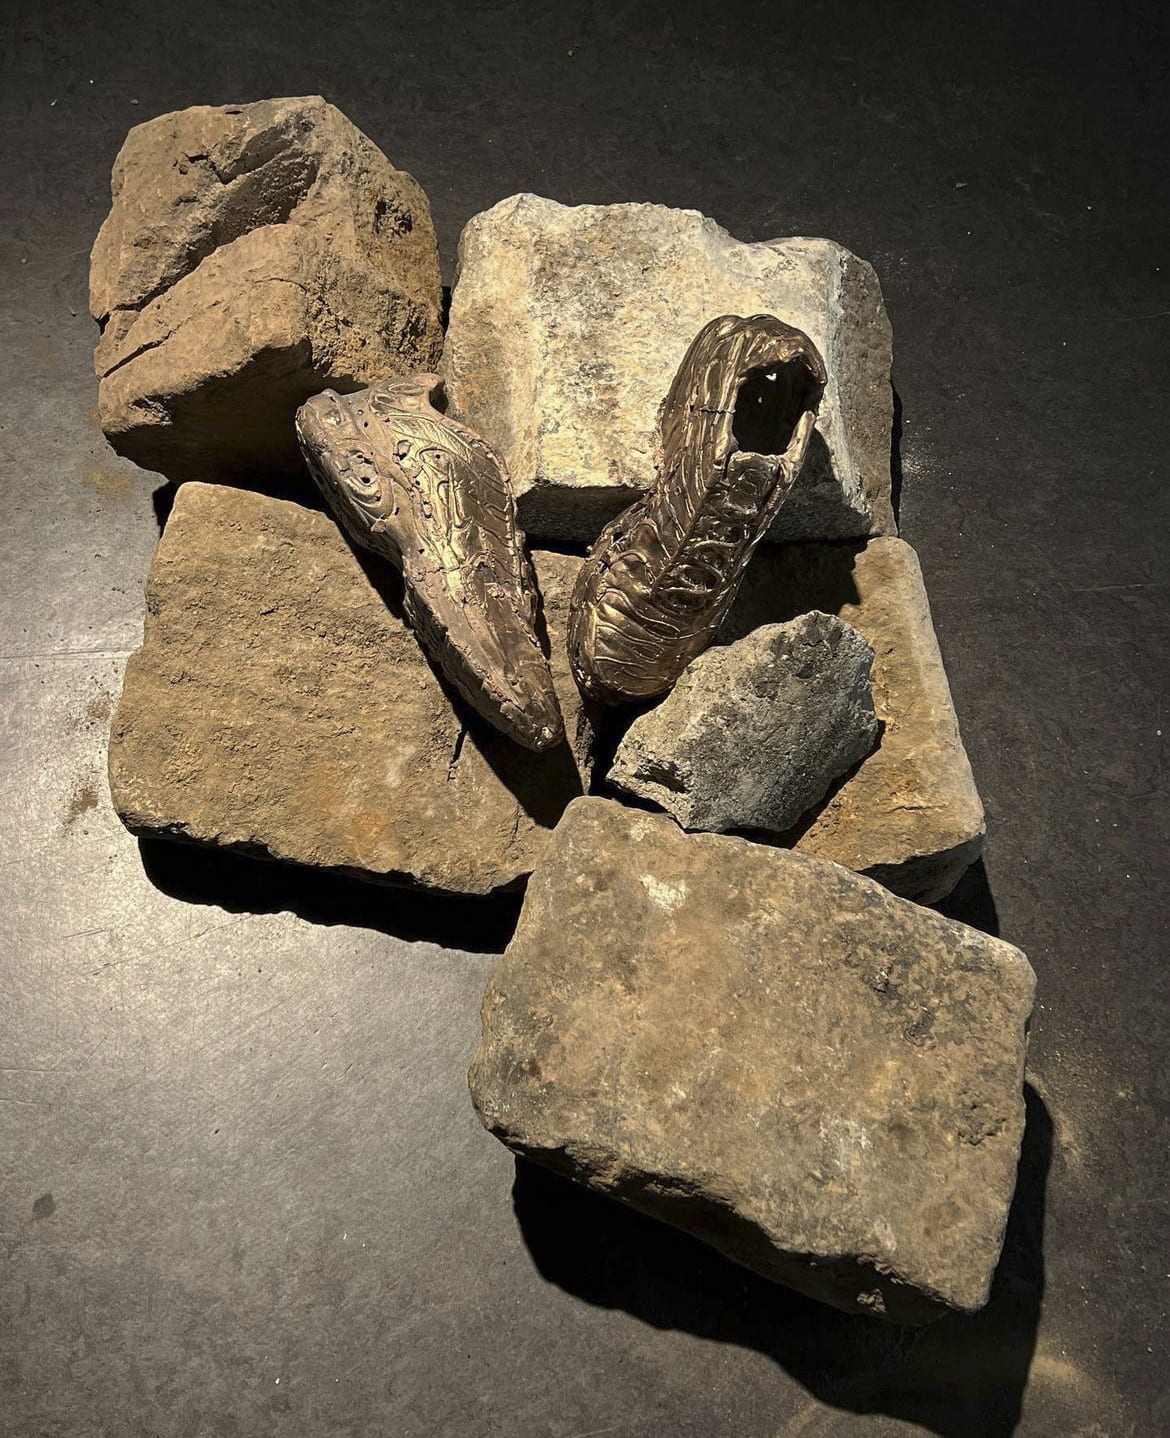 a pair of bronze nike sneakers lie amongst found blocks of pavement on floor